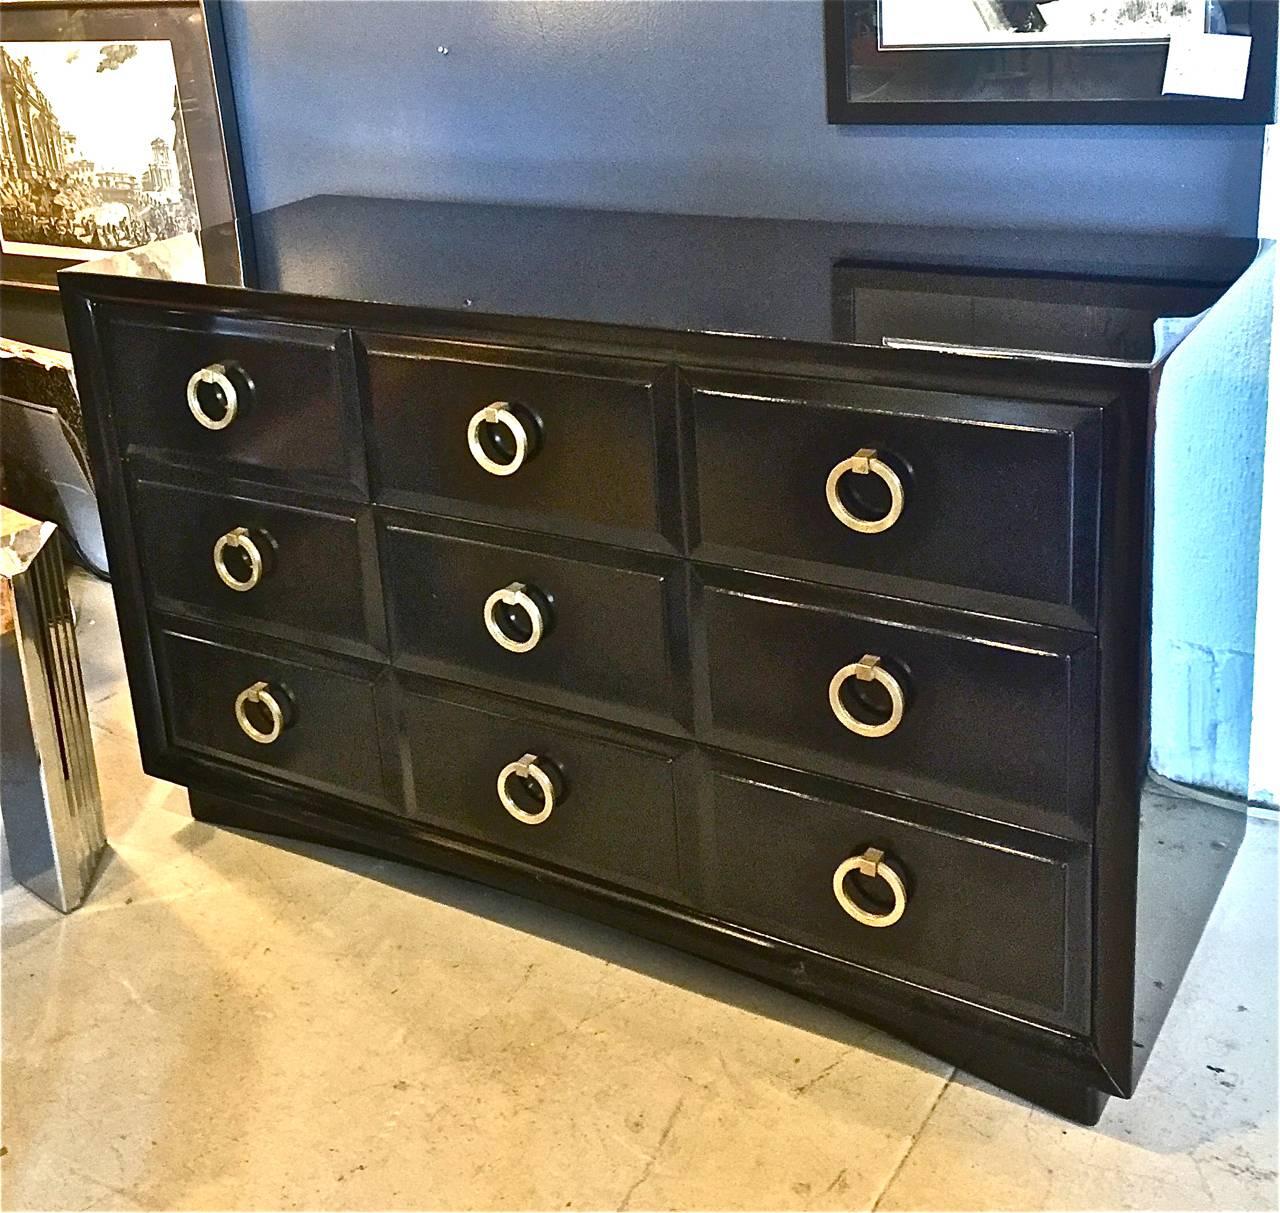 This is a beautiful Mid-Century Robsjohn-Gibbings by Widdicomb chest of drawers that dates to the late 1950s. The chest is newly lacquered in a black high gloss piano lacquer; it in mint condition and retains its original brass hardware.